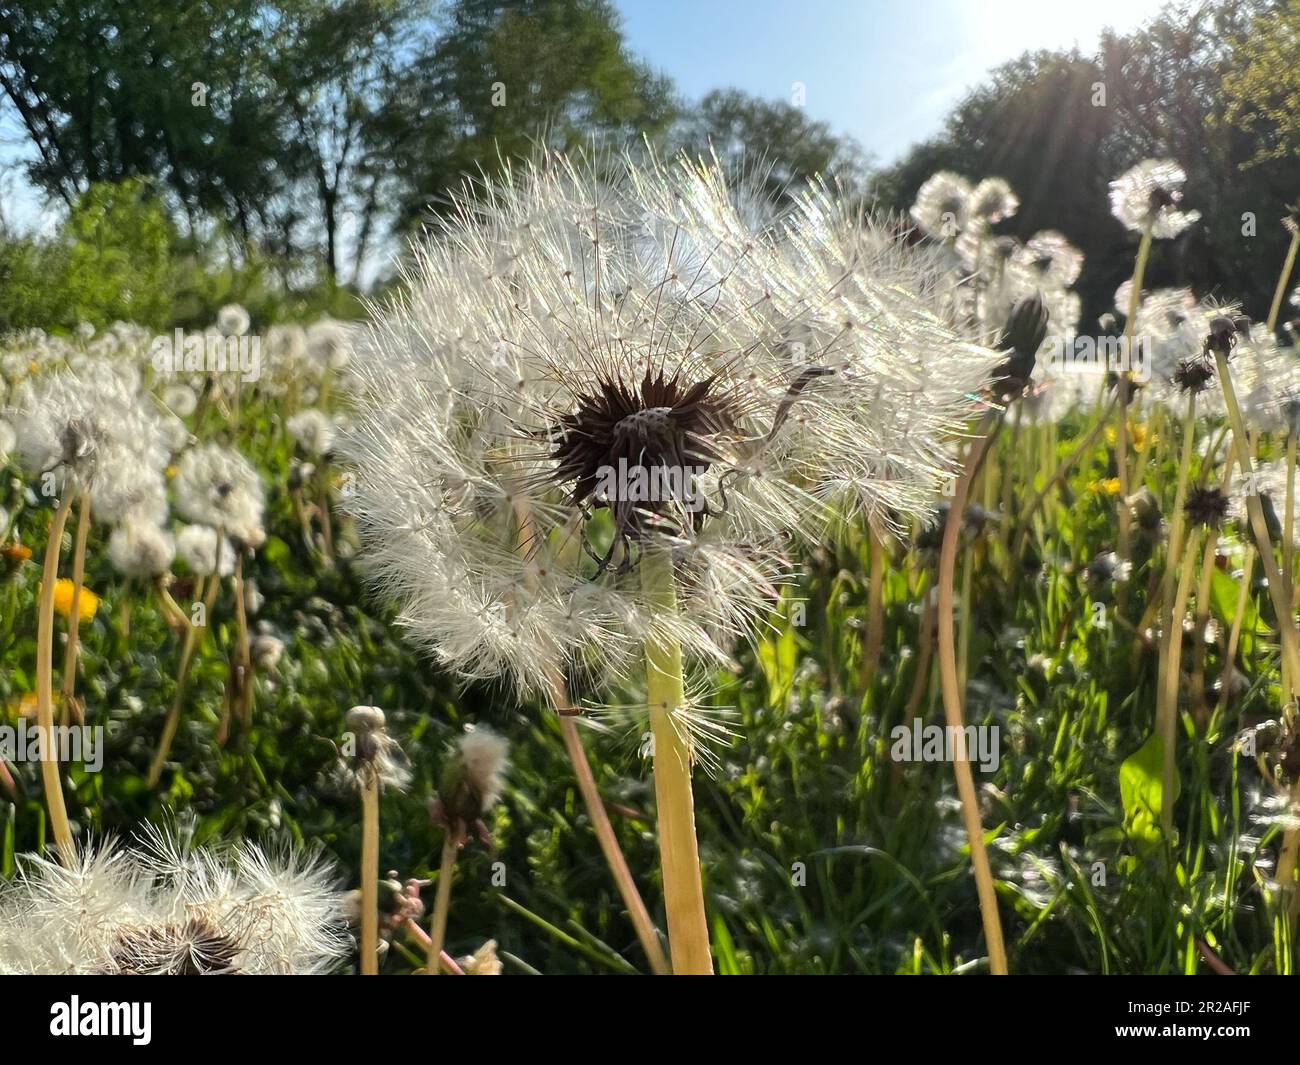 One dandelion with seeds close up in the sun Stock Photo